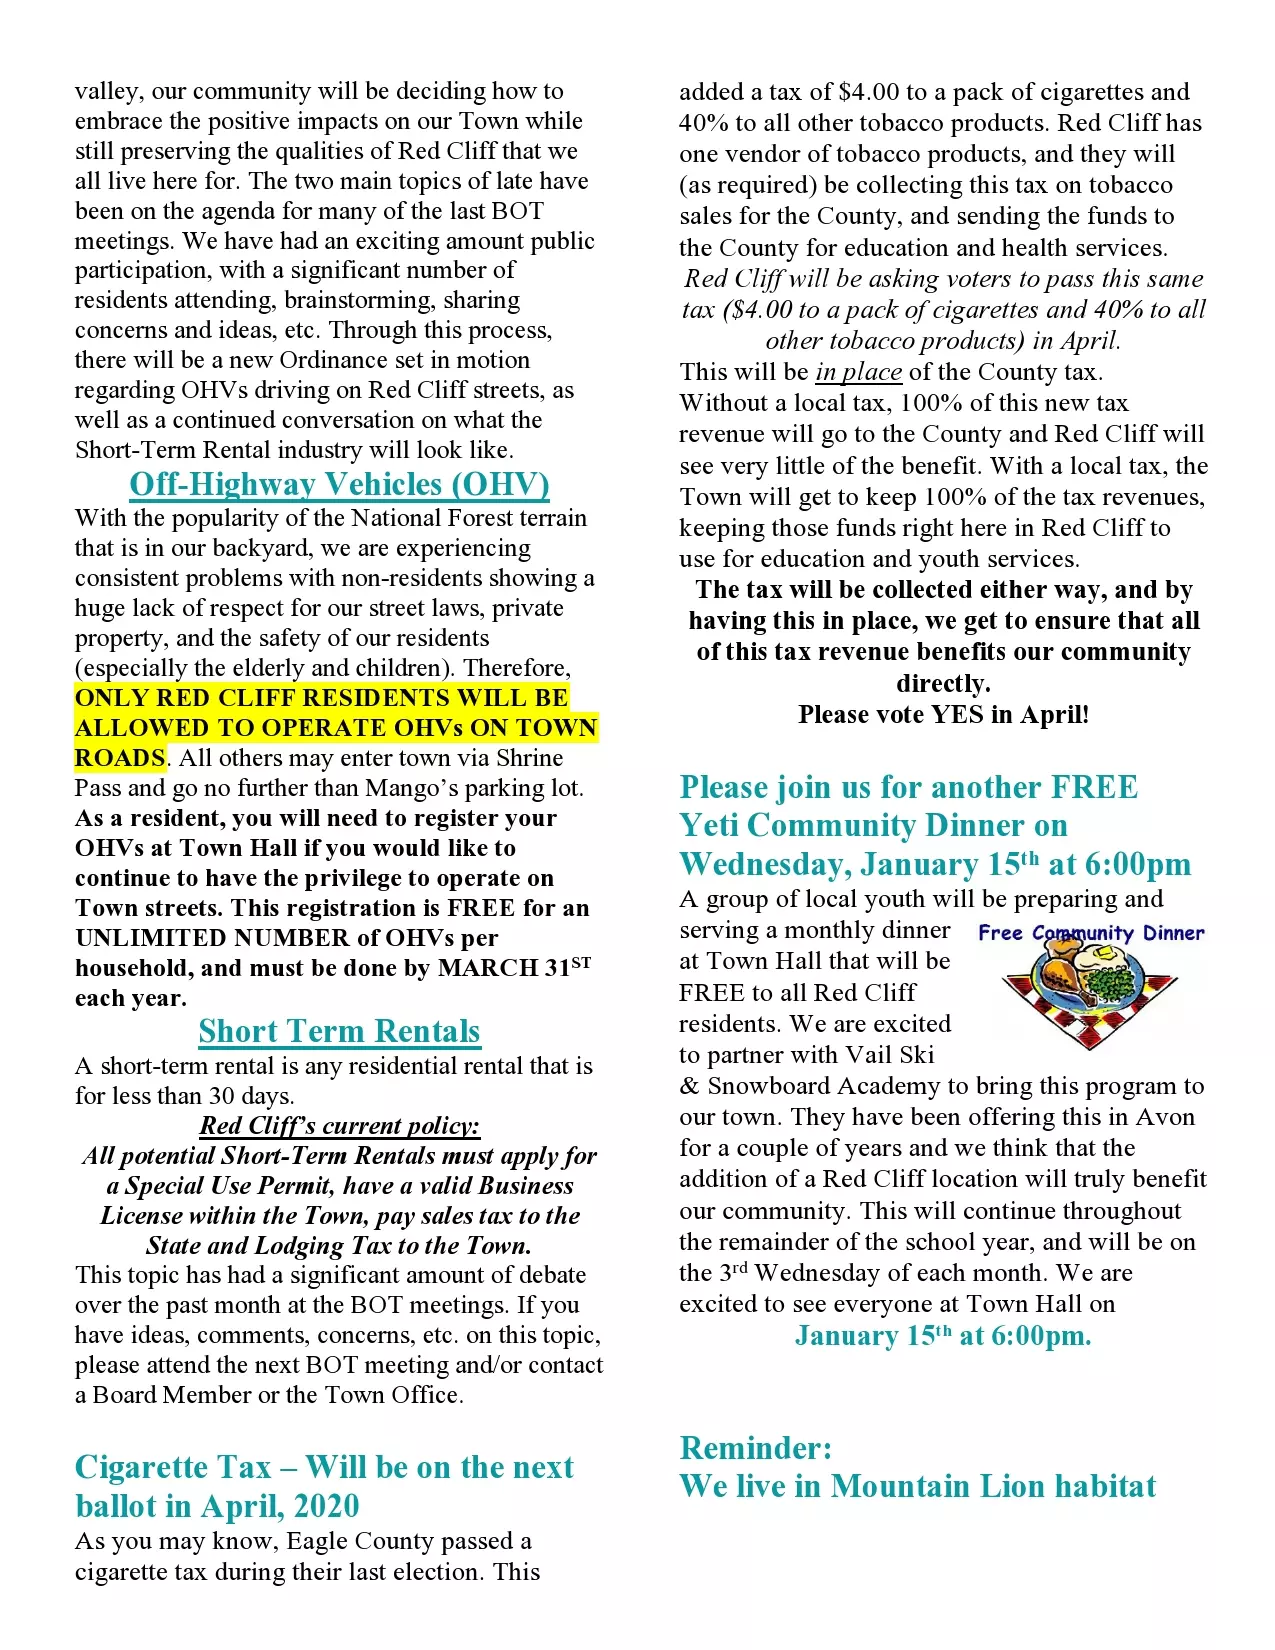 January 2020 Newsletter page 2